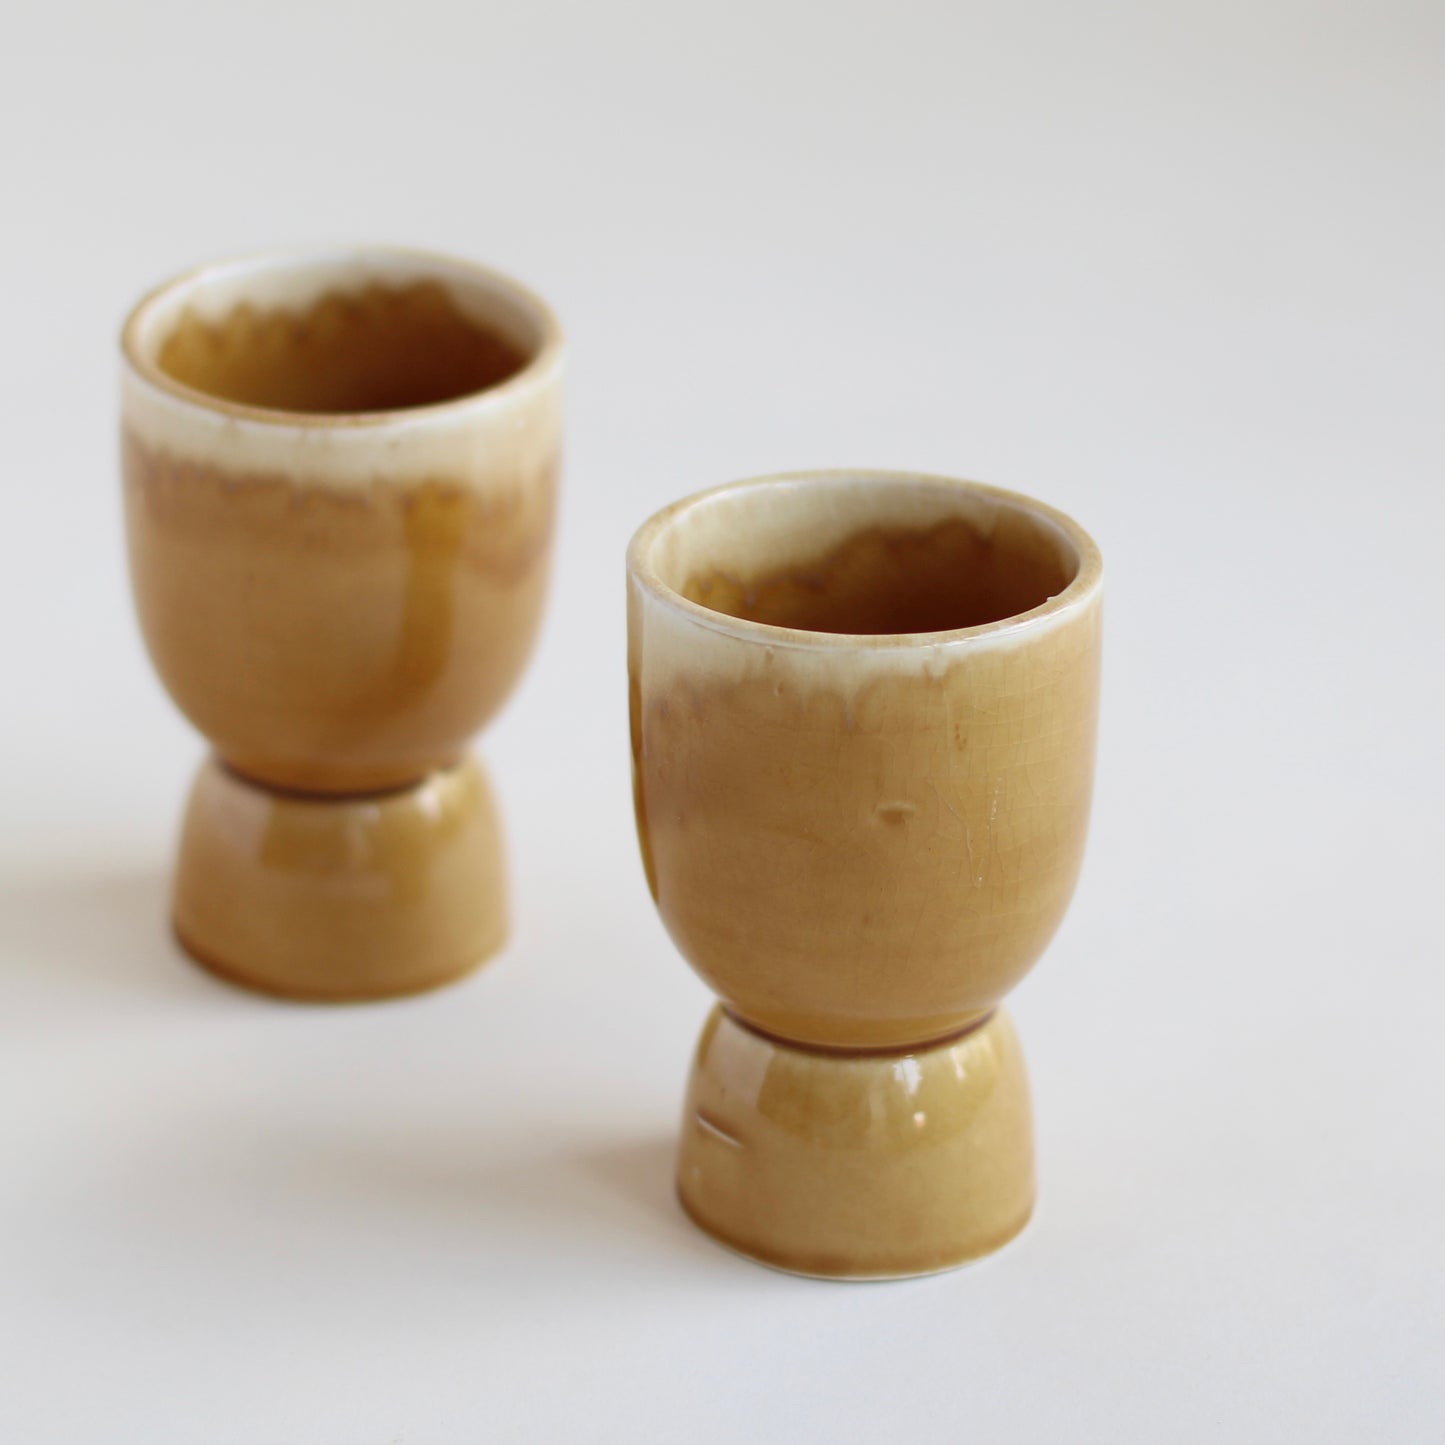 Pair of Ceramic Footed Tumblers from Japan